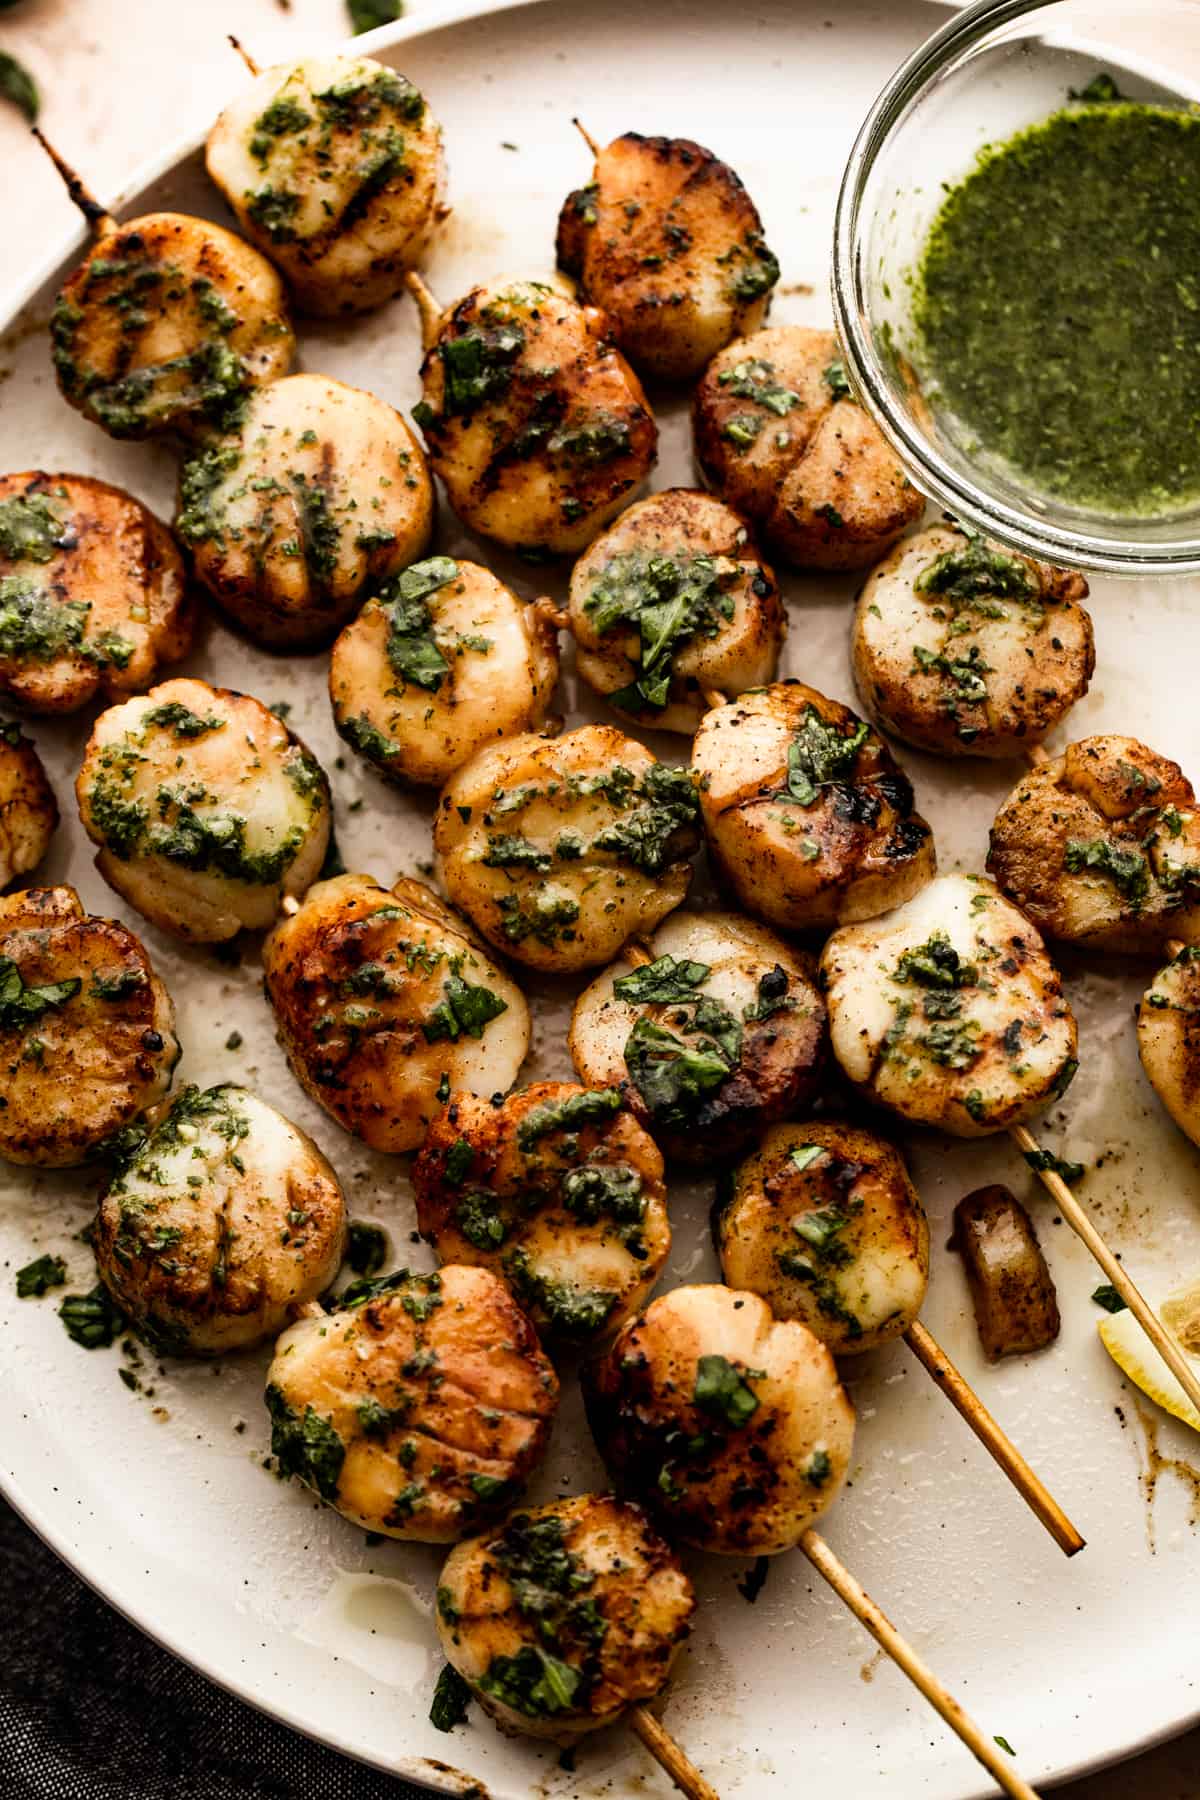 Grilled scallop skewers on a plate with basil garlic sauce.